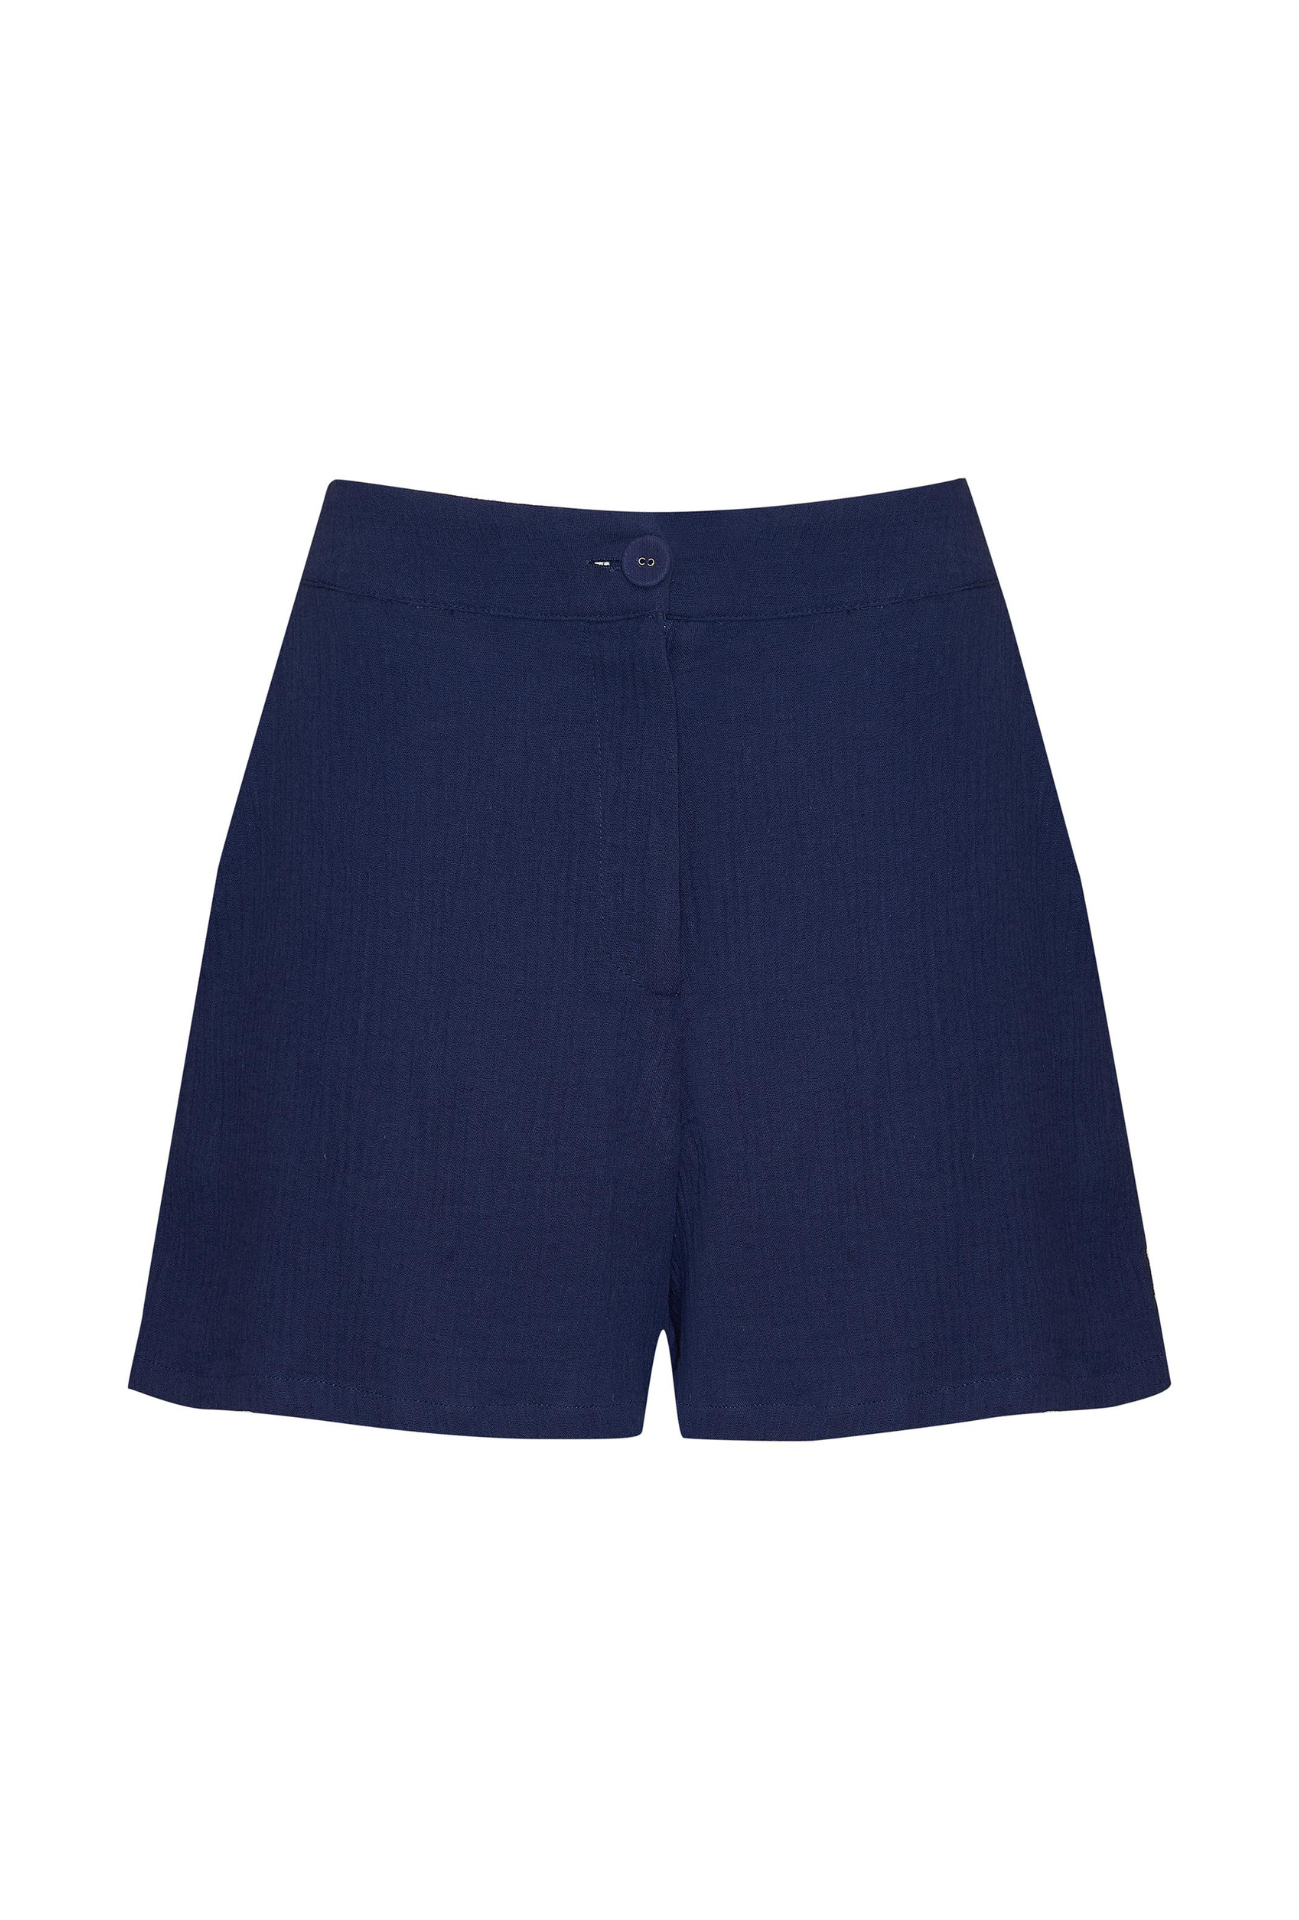 GILLY SHORTS - DEEP BLUE